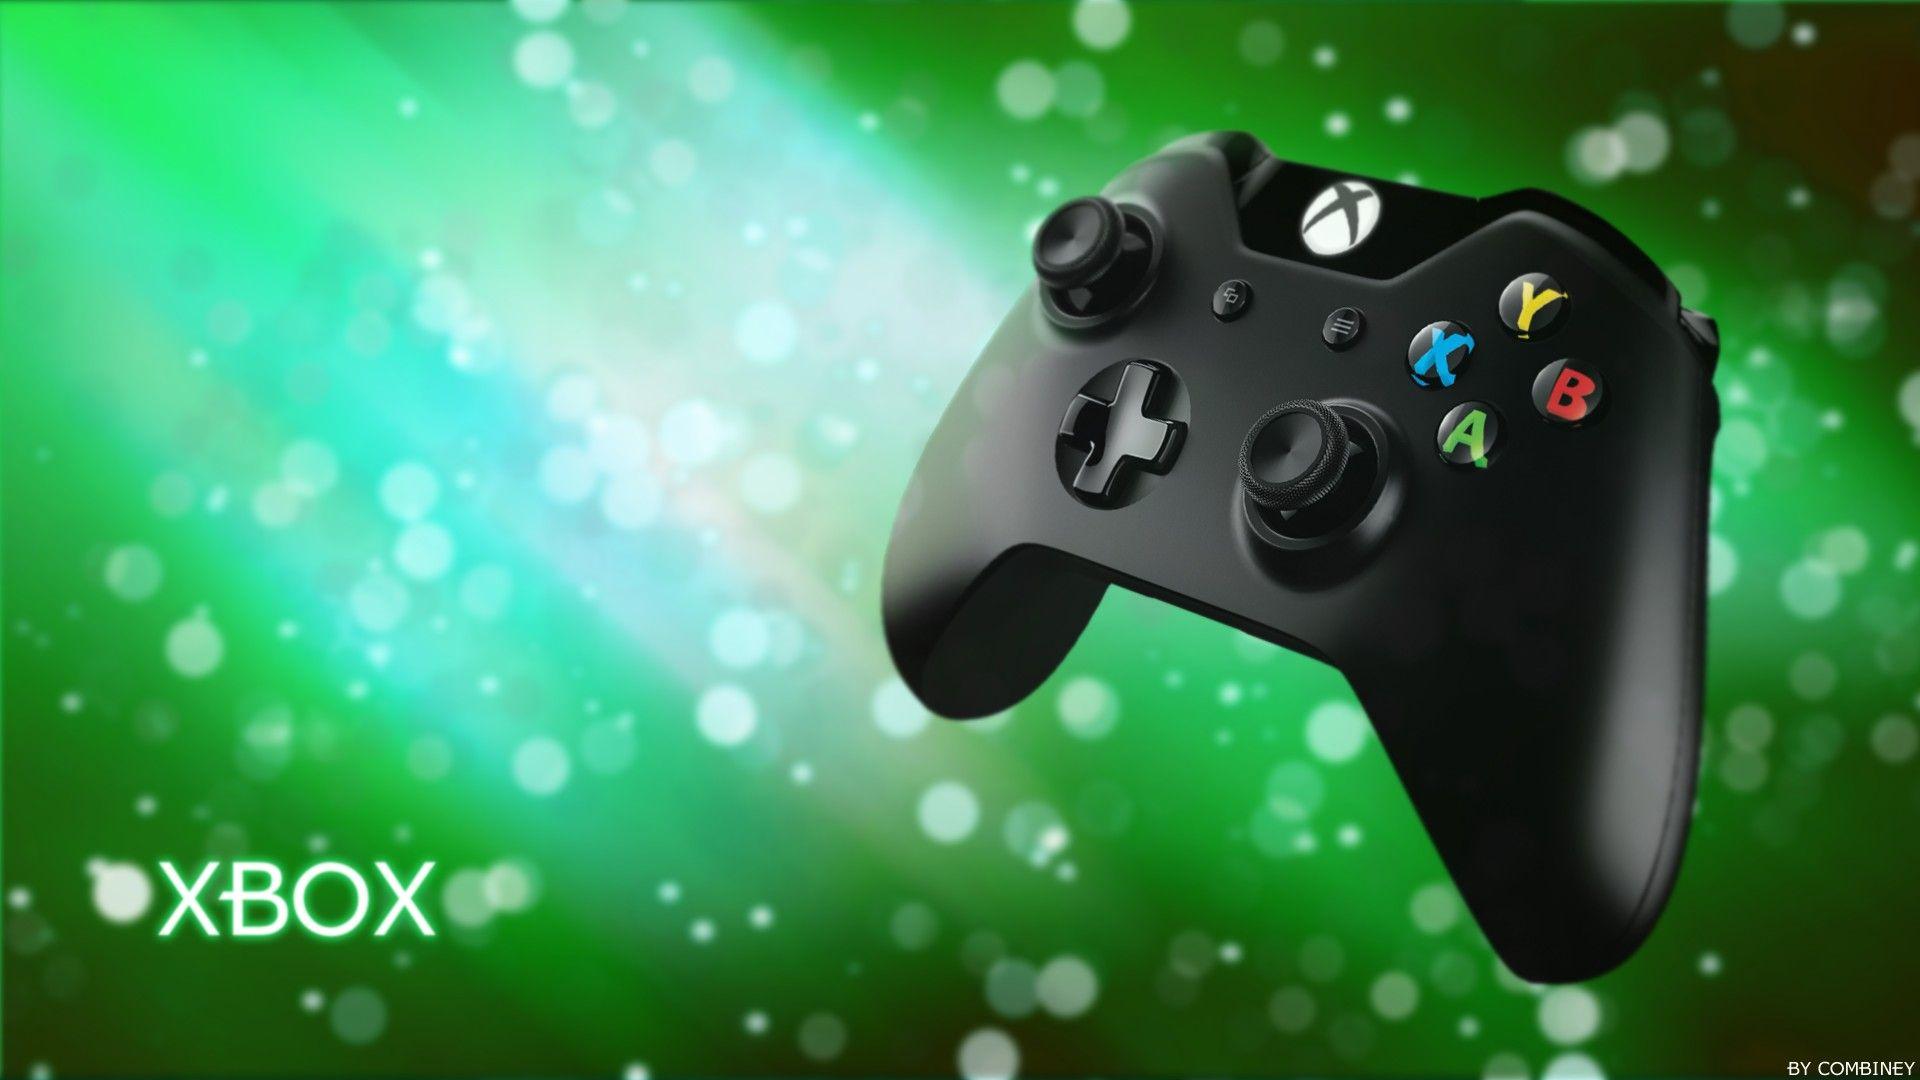 Xbox One Wallpapers, HDQ Xbox One Image Collection for Desktop, VV.22